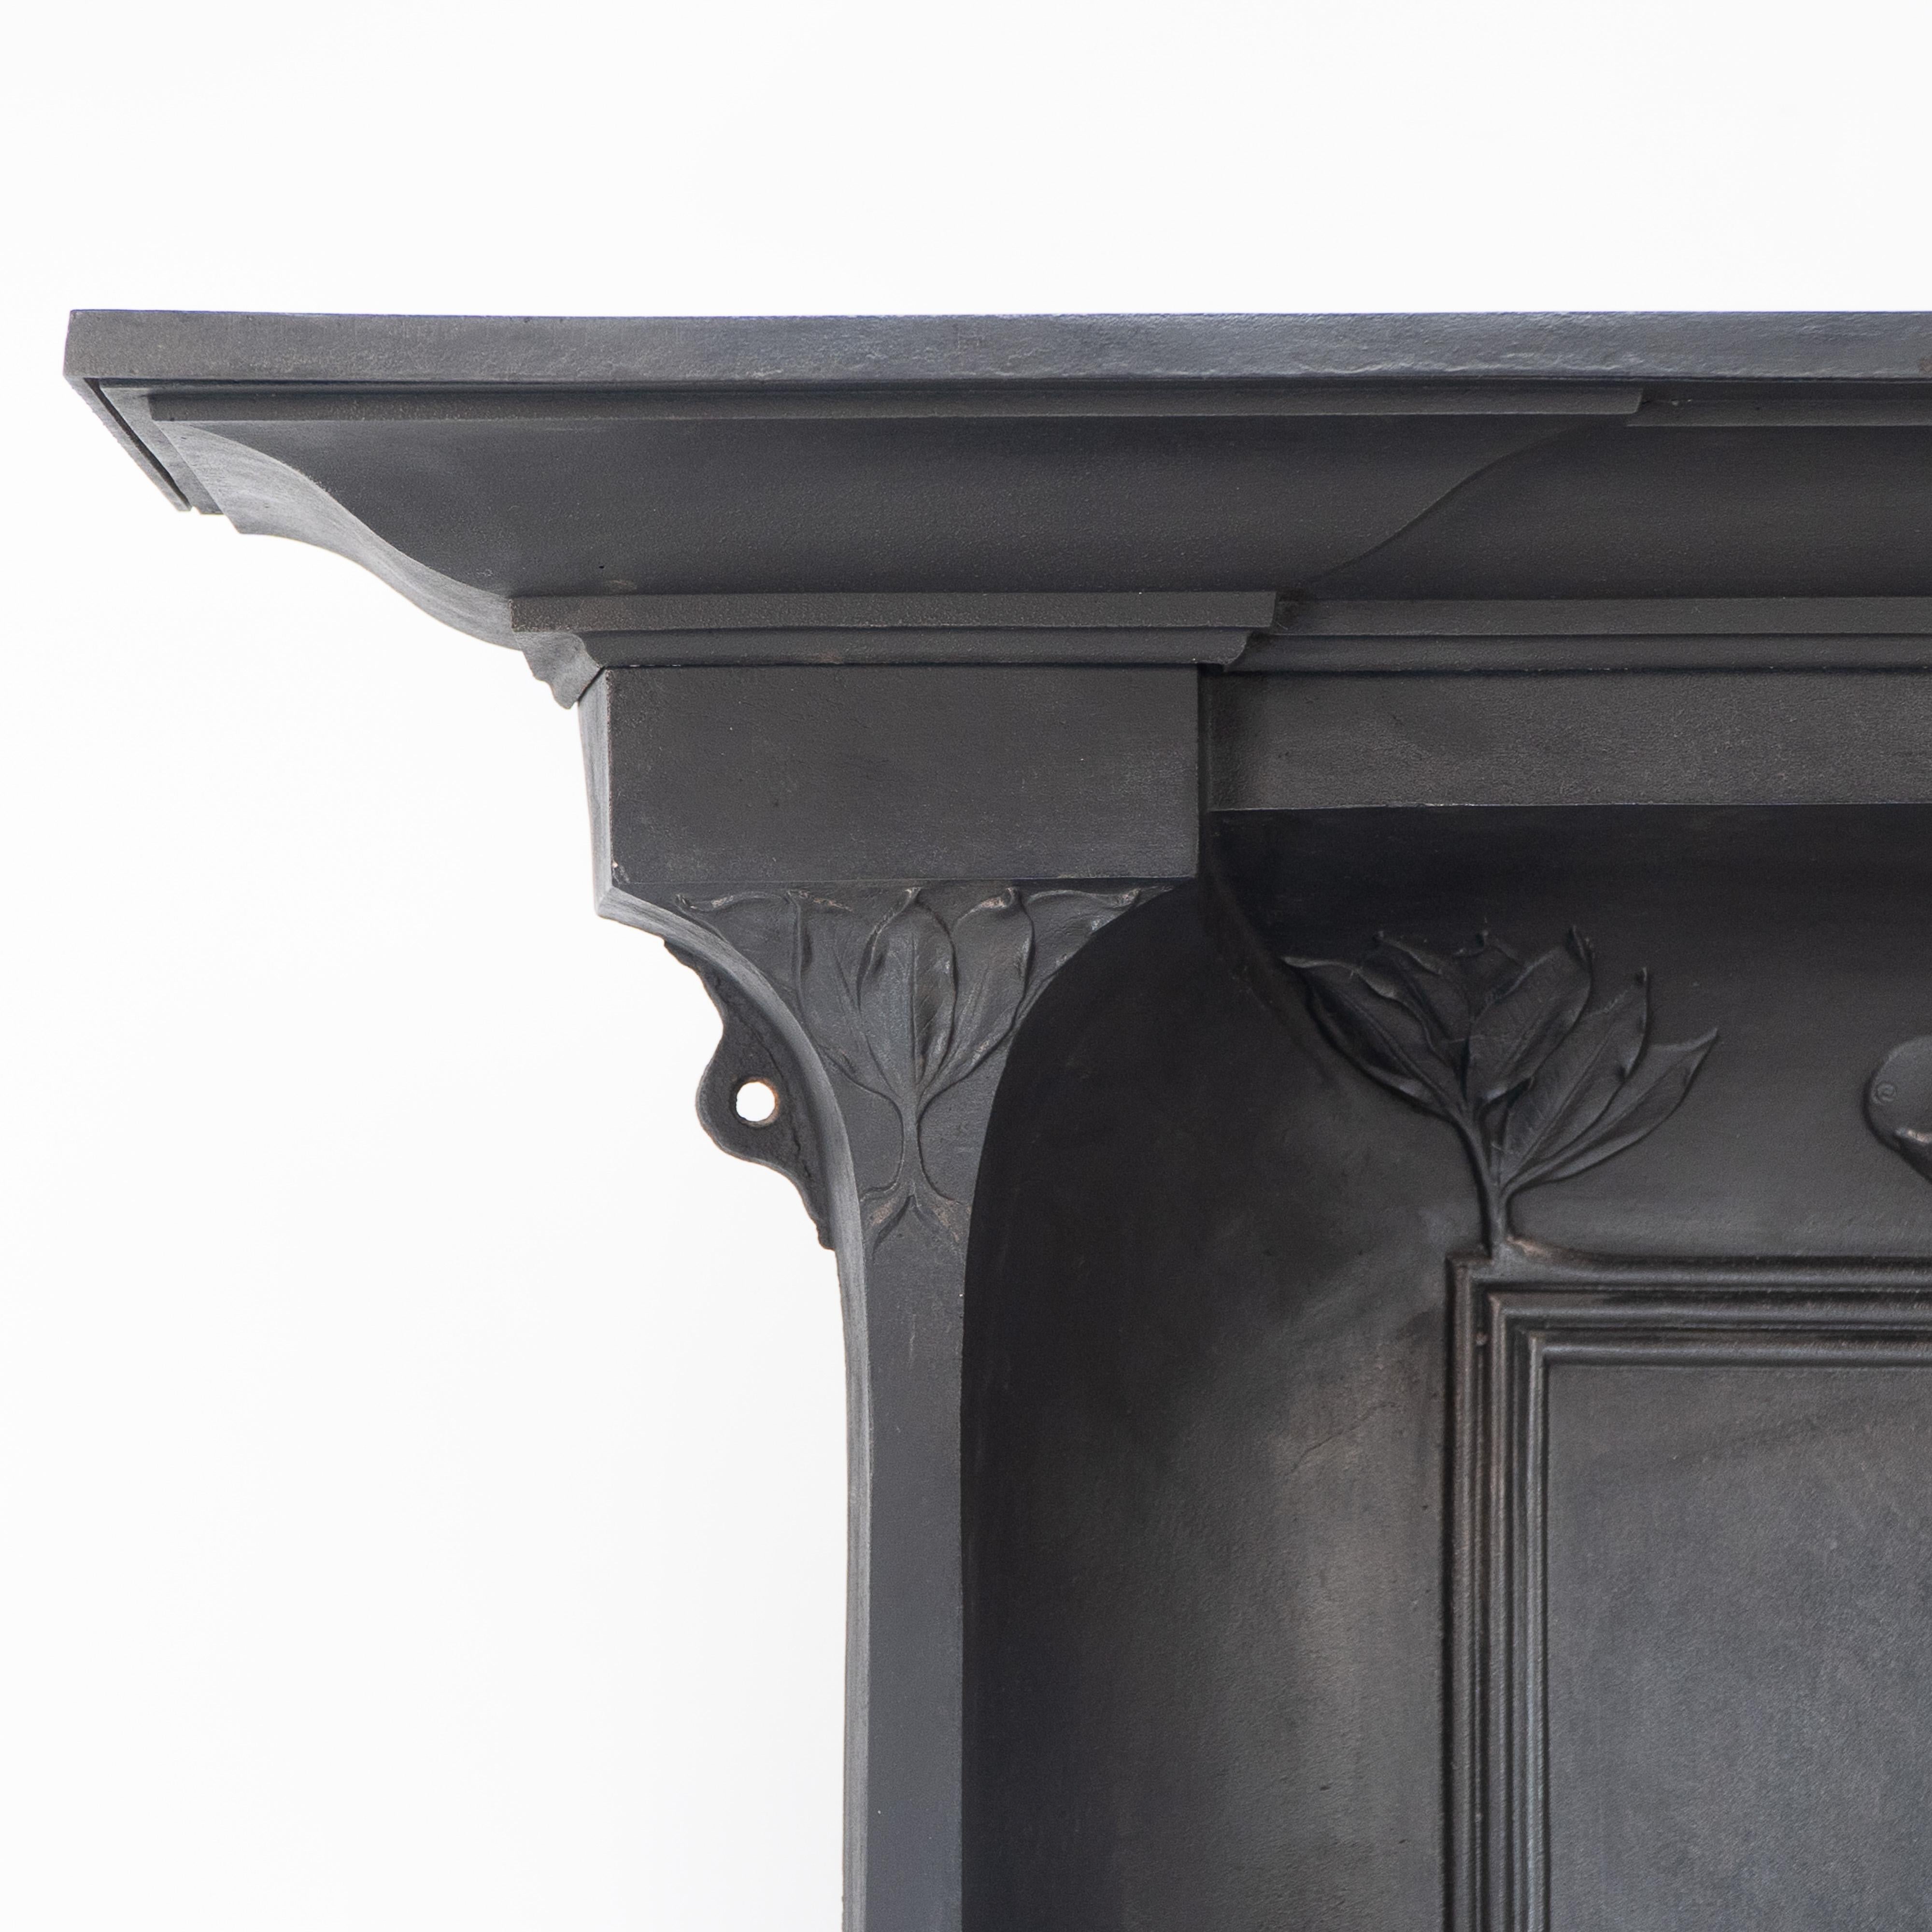 An Arts and Crafts cast iron fireplace with curved sides designed to throw more heat into the room with stylized floral decoration throughout, pillars to the sides and heating shelves to each side near the base. There was a hairline crack to the